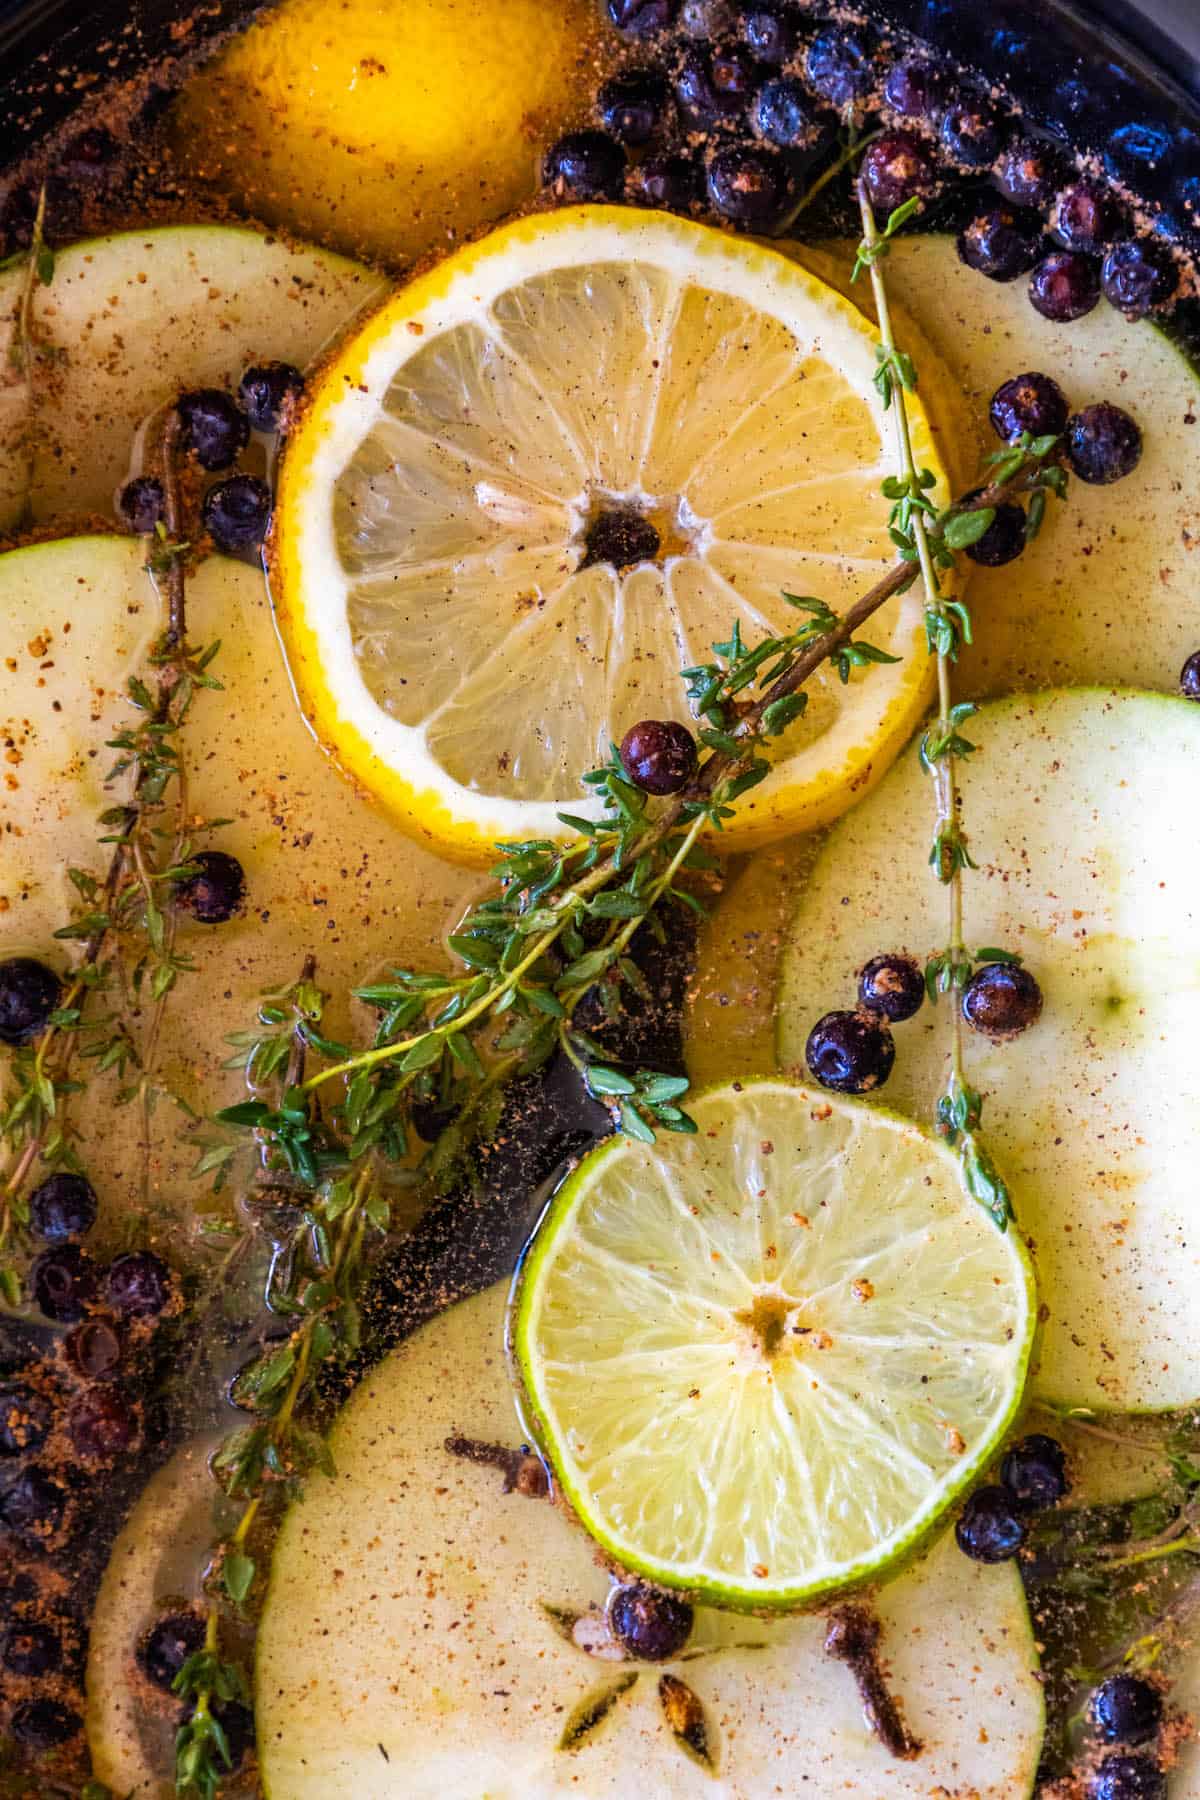 A crockpot filled with apples, pears, lemons and sprigs of thyme.